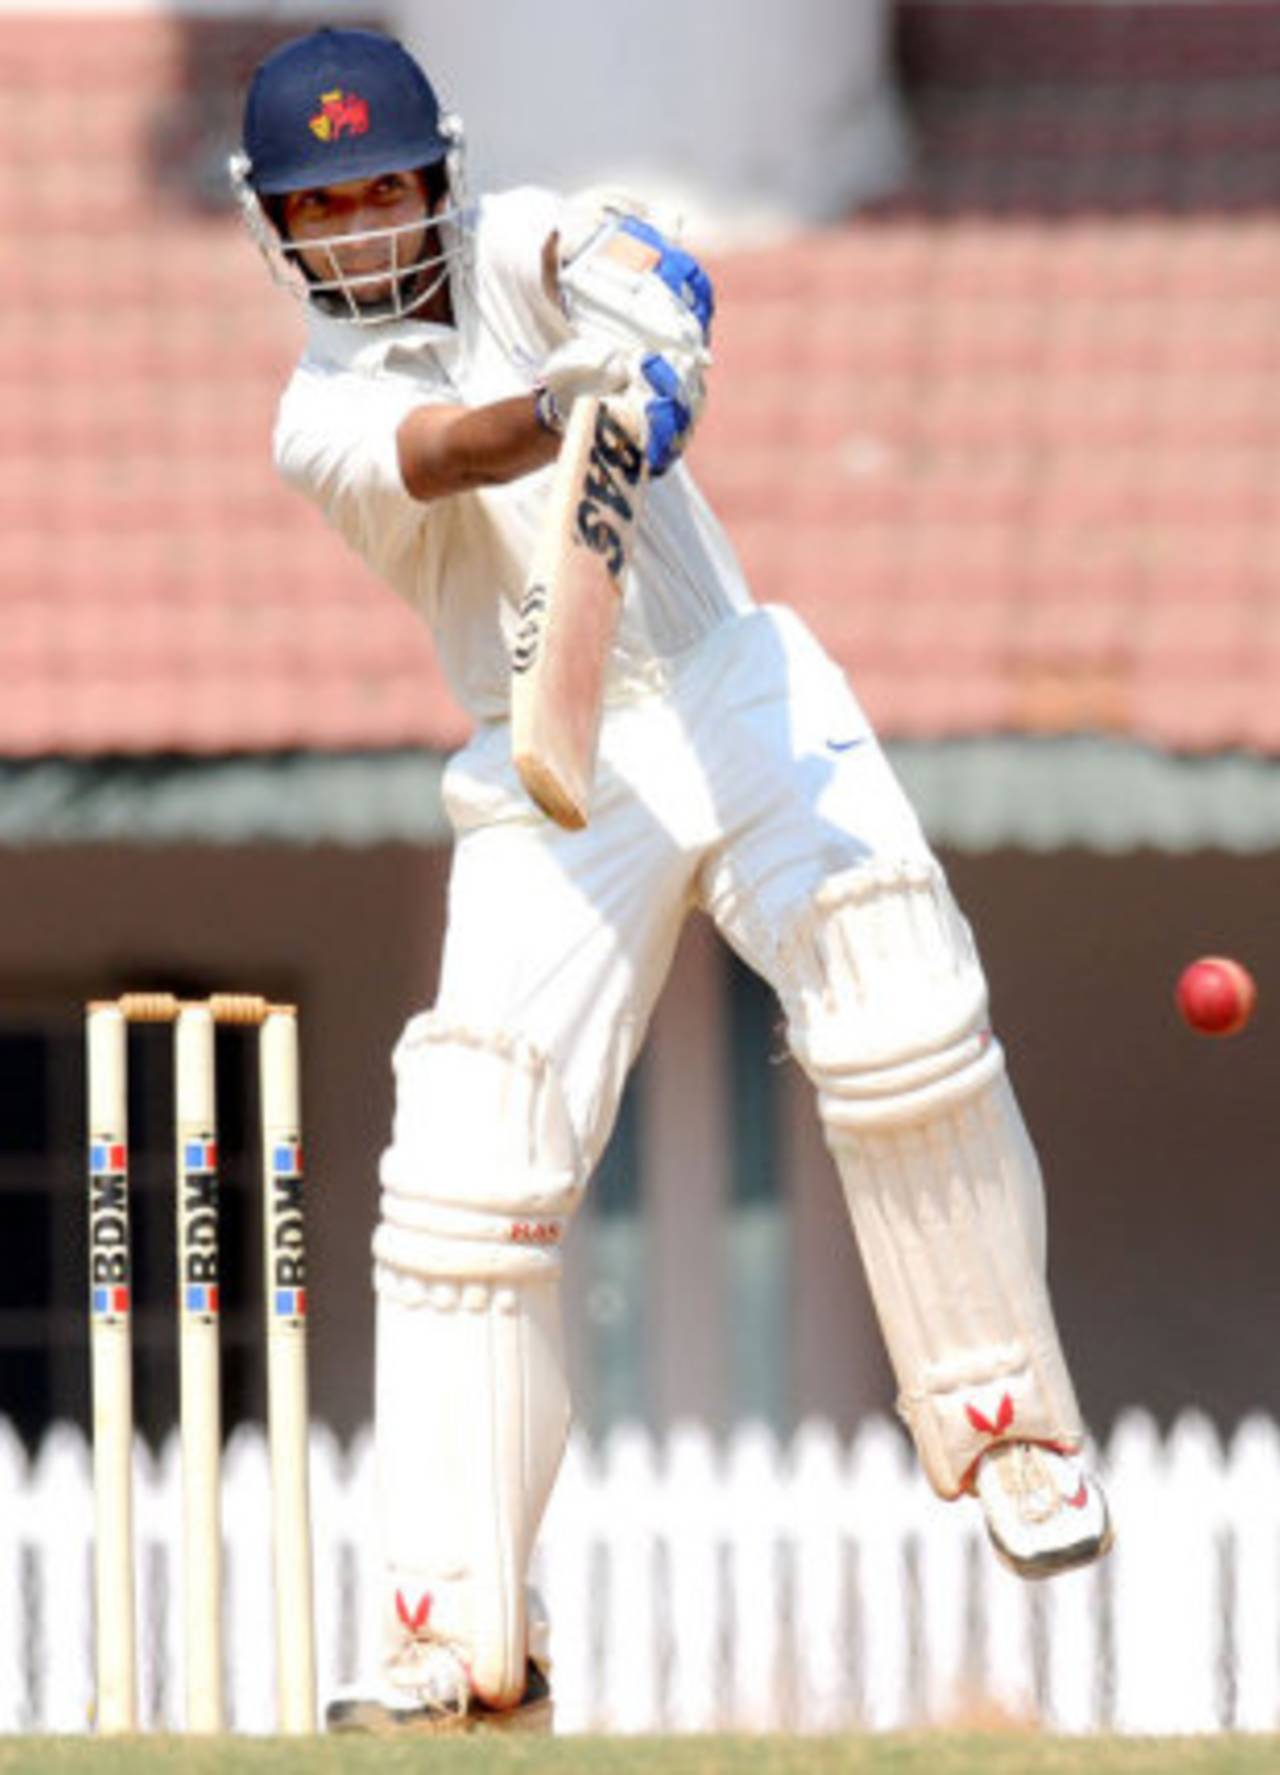 Ajinkya Rahane was picked as a reserve opener on India's tour of Australia, but he batted at No. 3 in the first two games for India A in the West Indies&nbsp;&nbsp;&bull;&nbsp;&nbsp;Sivaraman Kitta/K Sivaraman